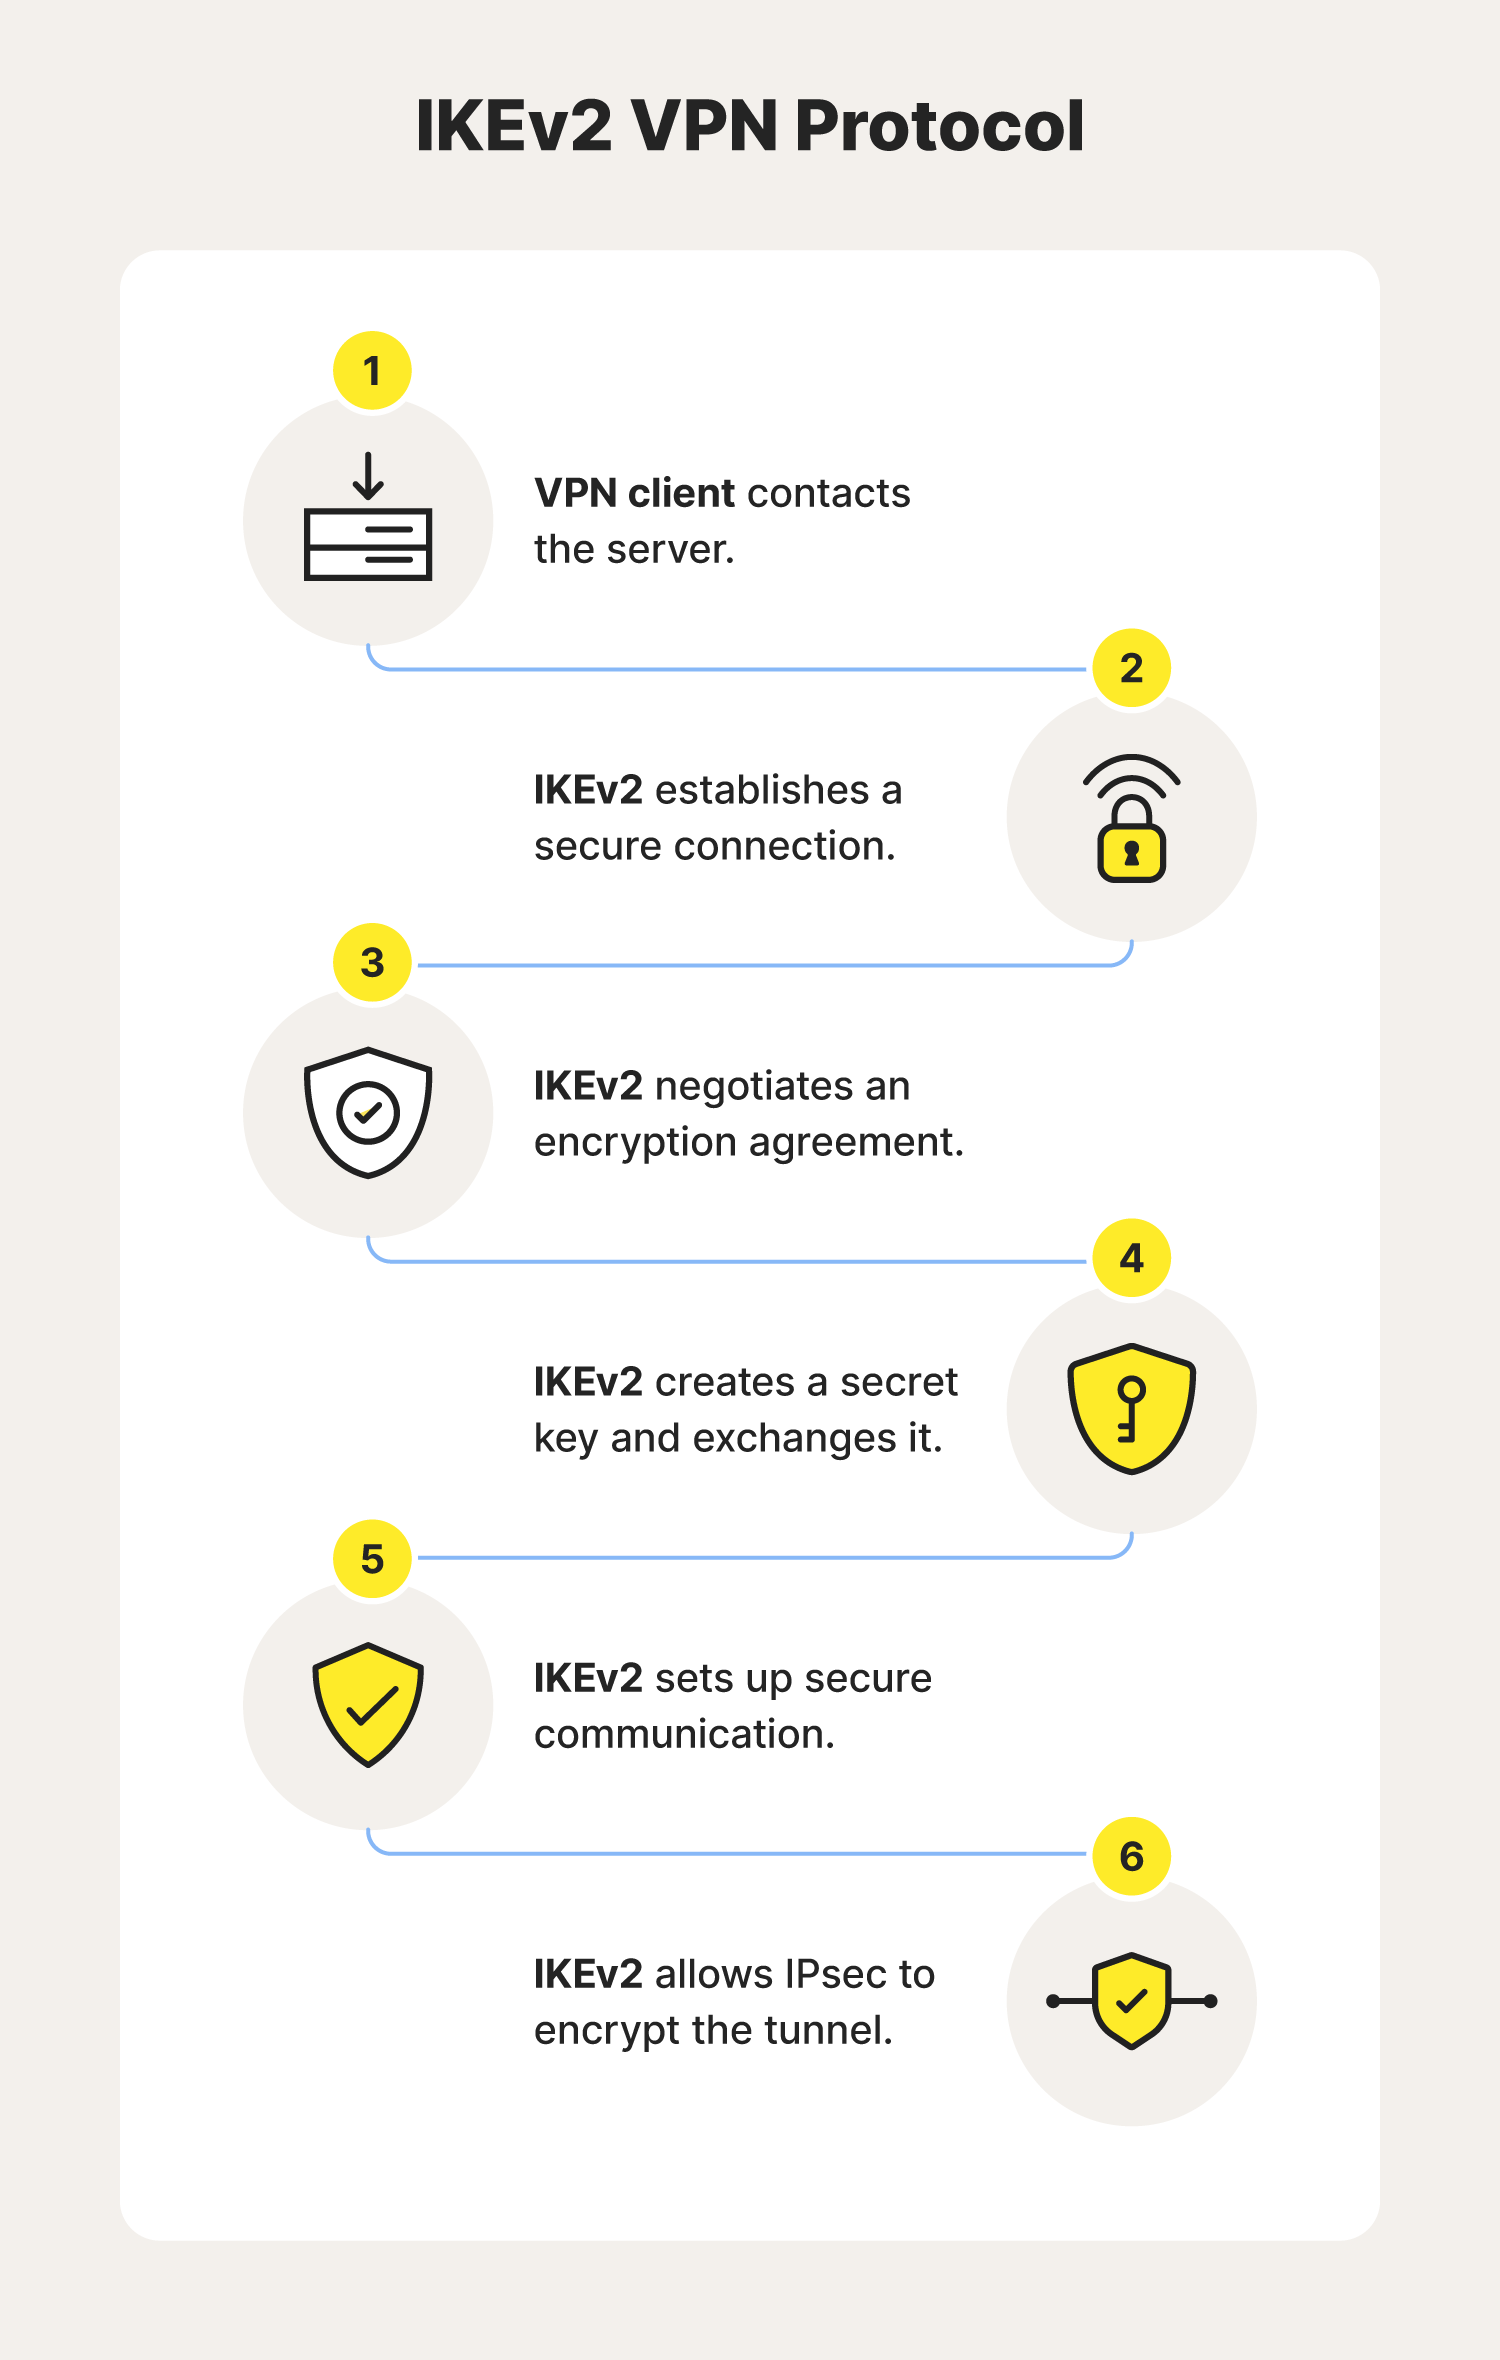 An explanation of how the IKEv2 VPN protocol works.